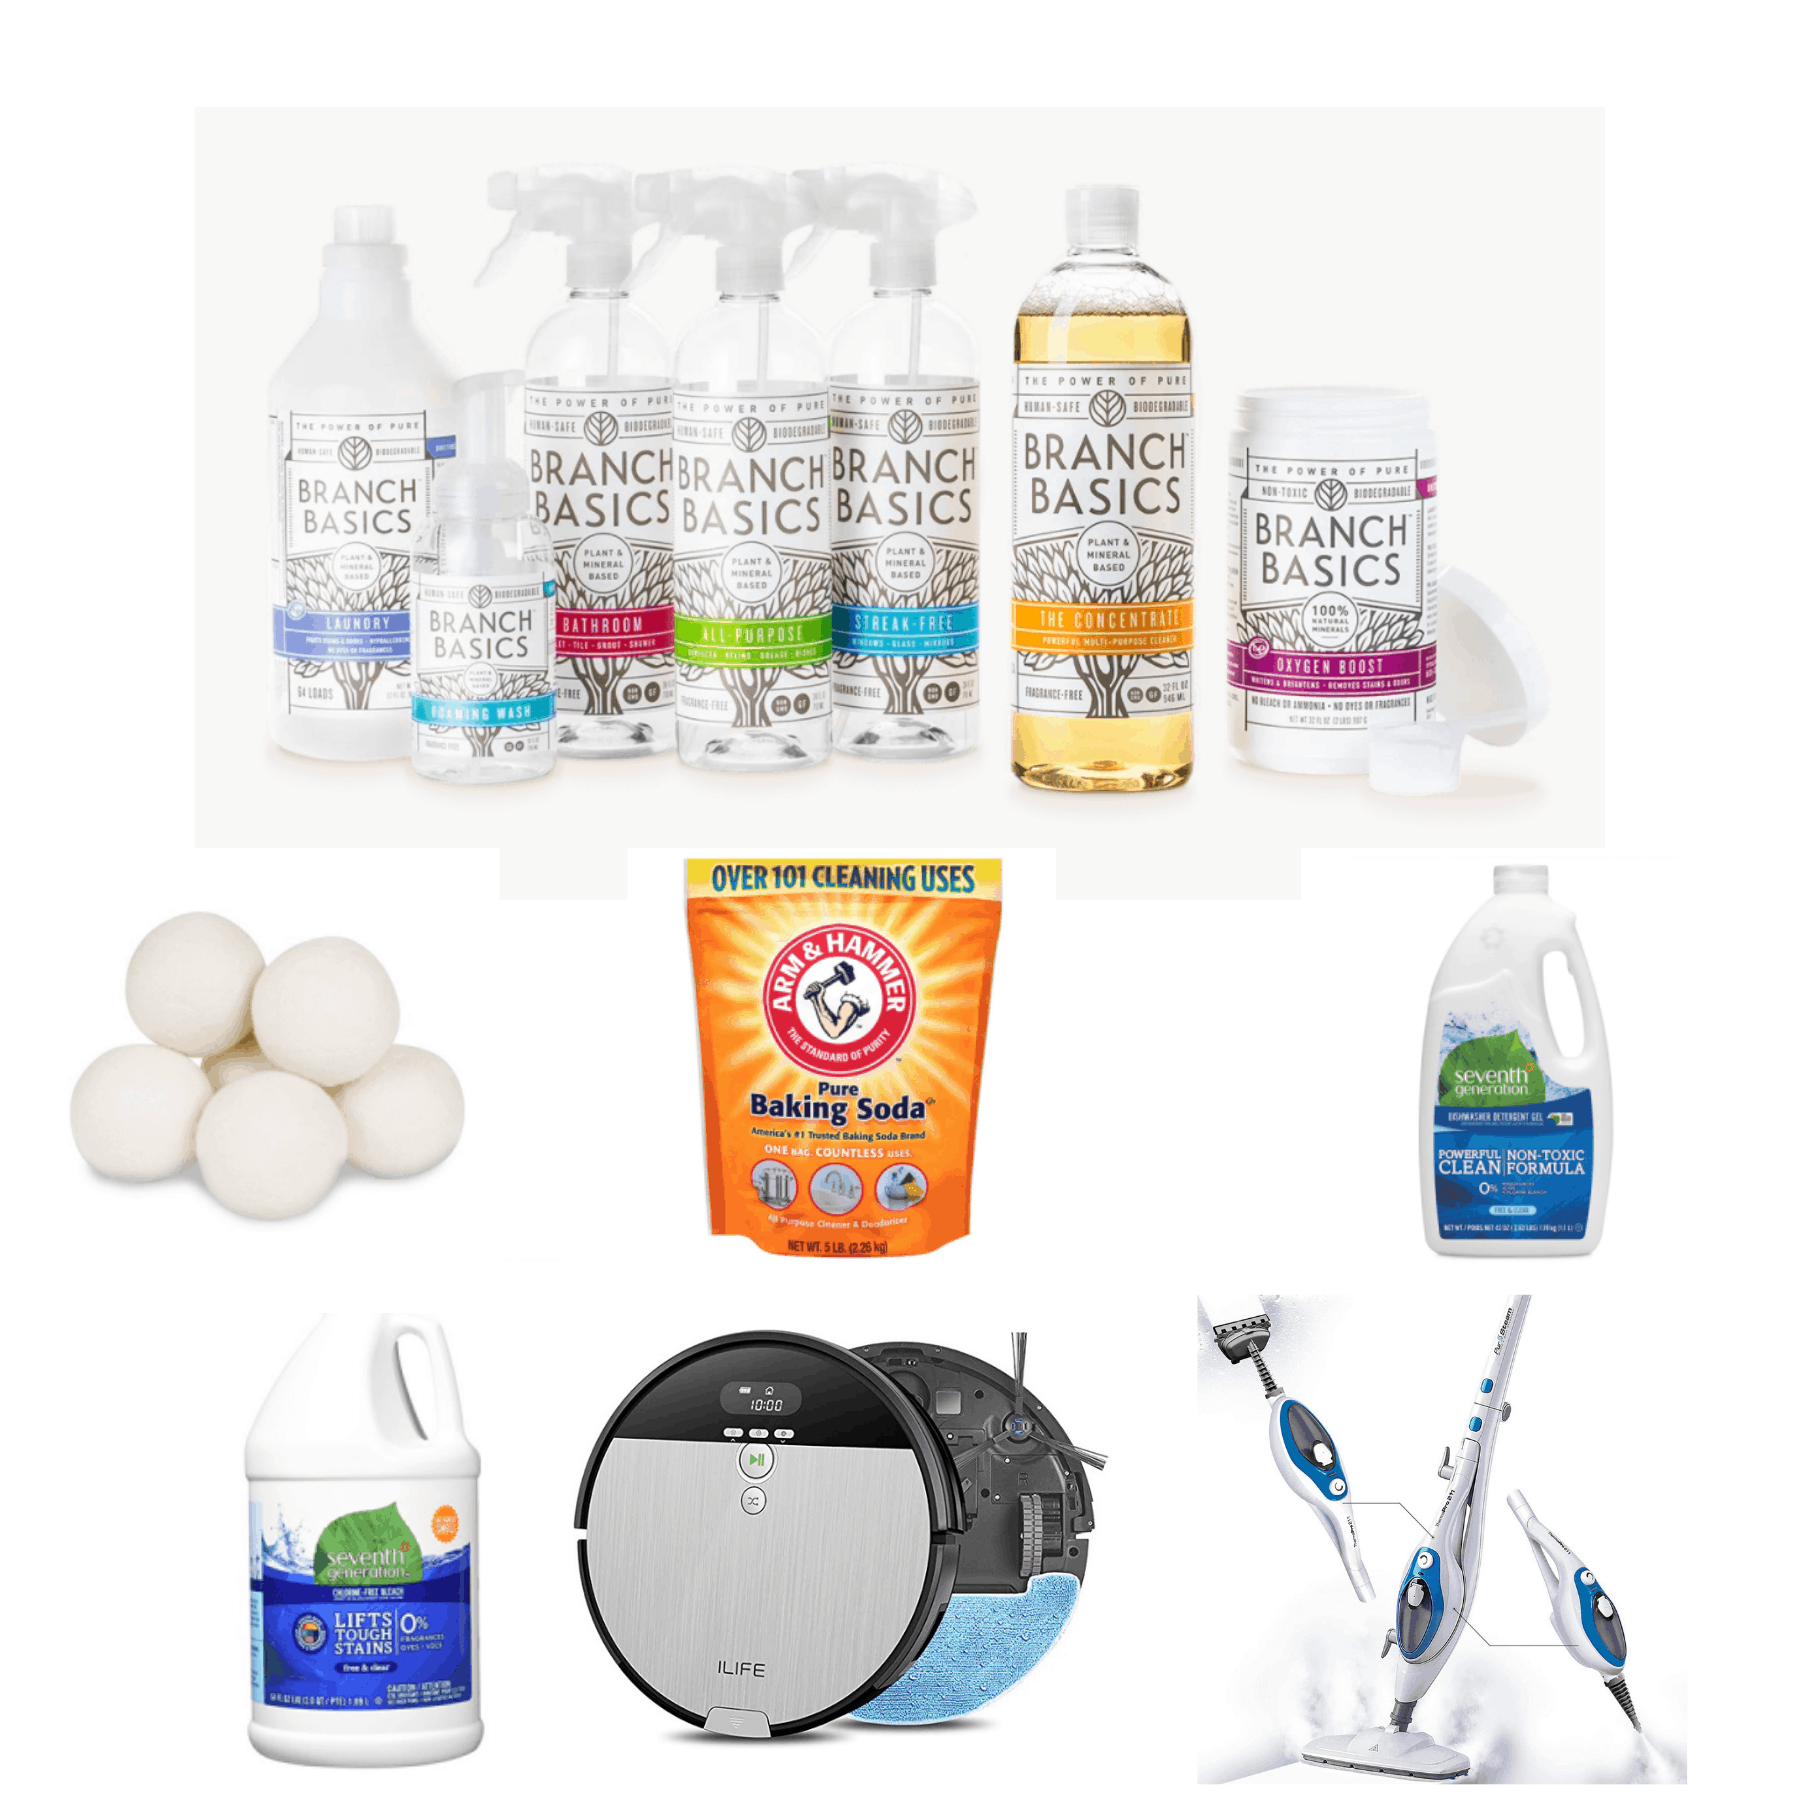 Cleaning With Non-Toxic Products